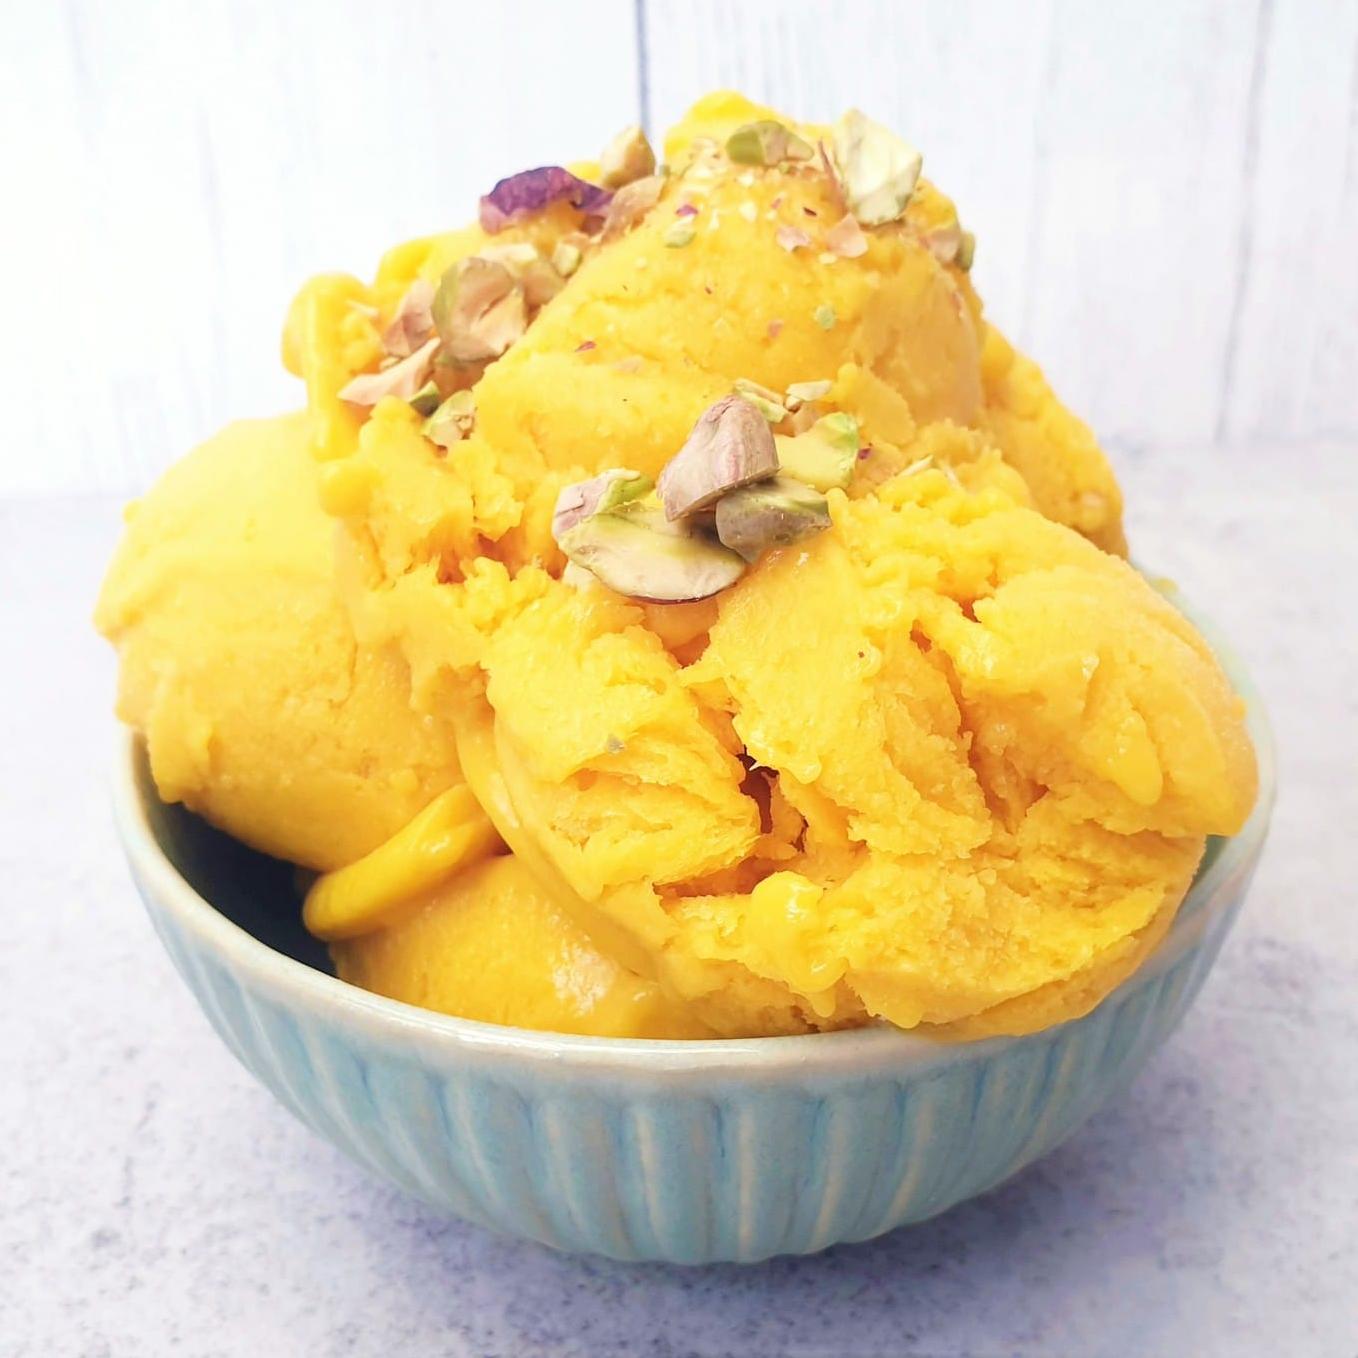  Creamy and delicious, this vegan ice cream is a melt-in-your-mouth treat!